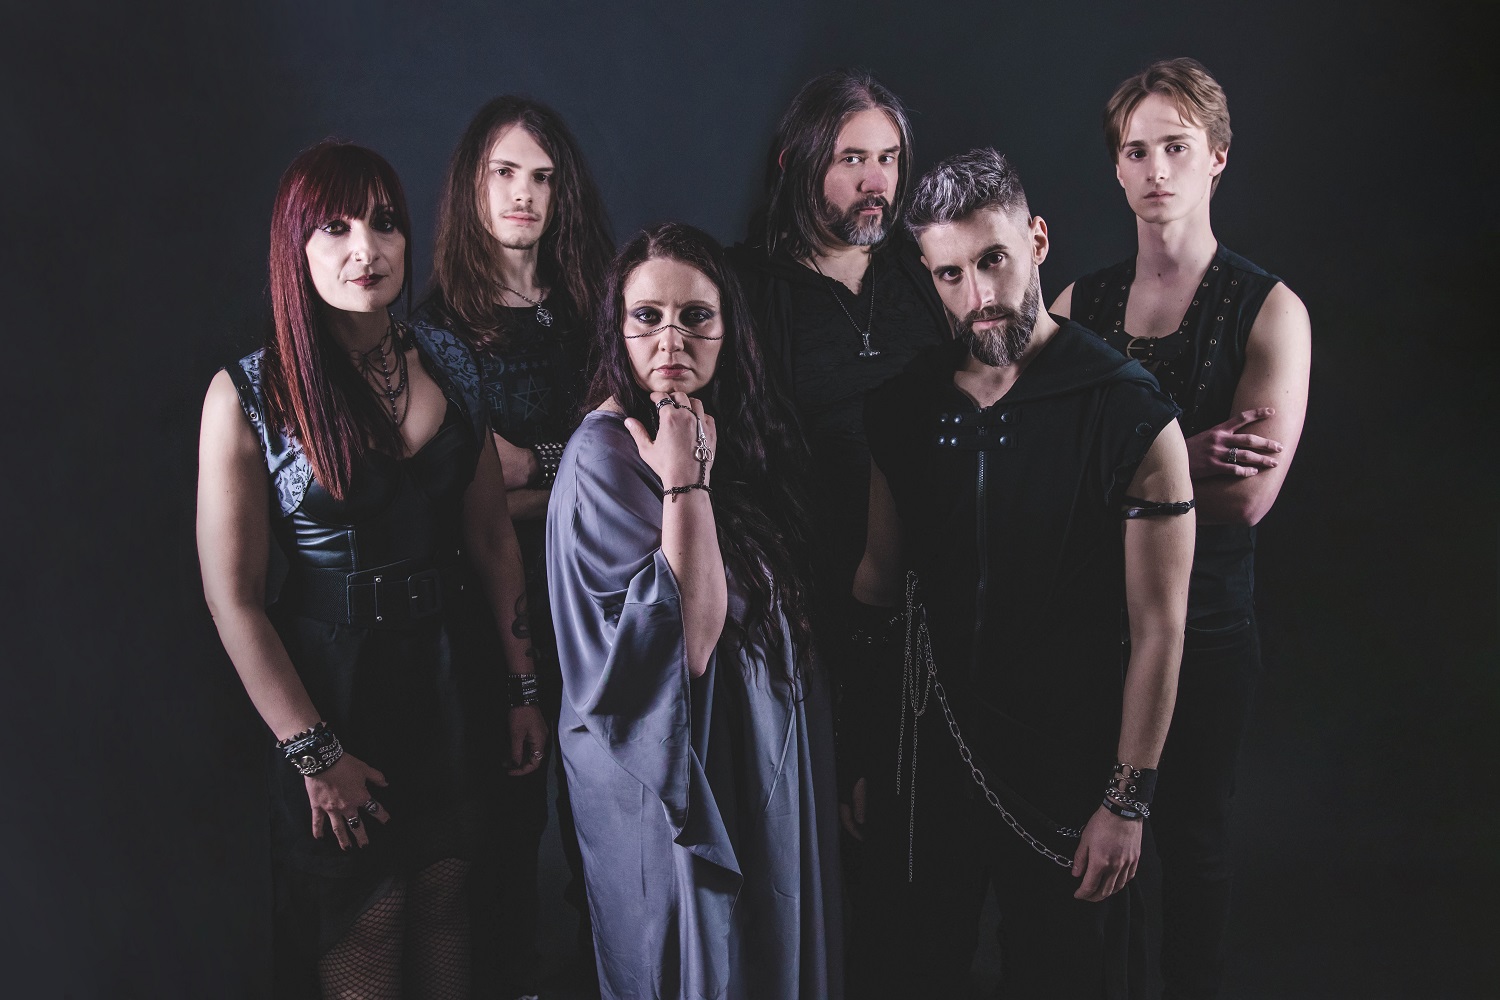 ETERNAL SILENCE – guarda il live video di “Death And The Maiden”